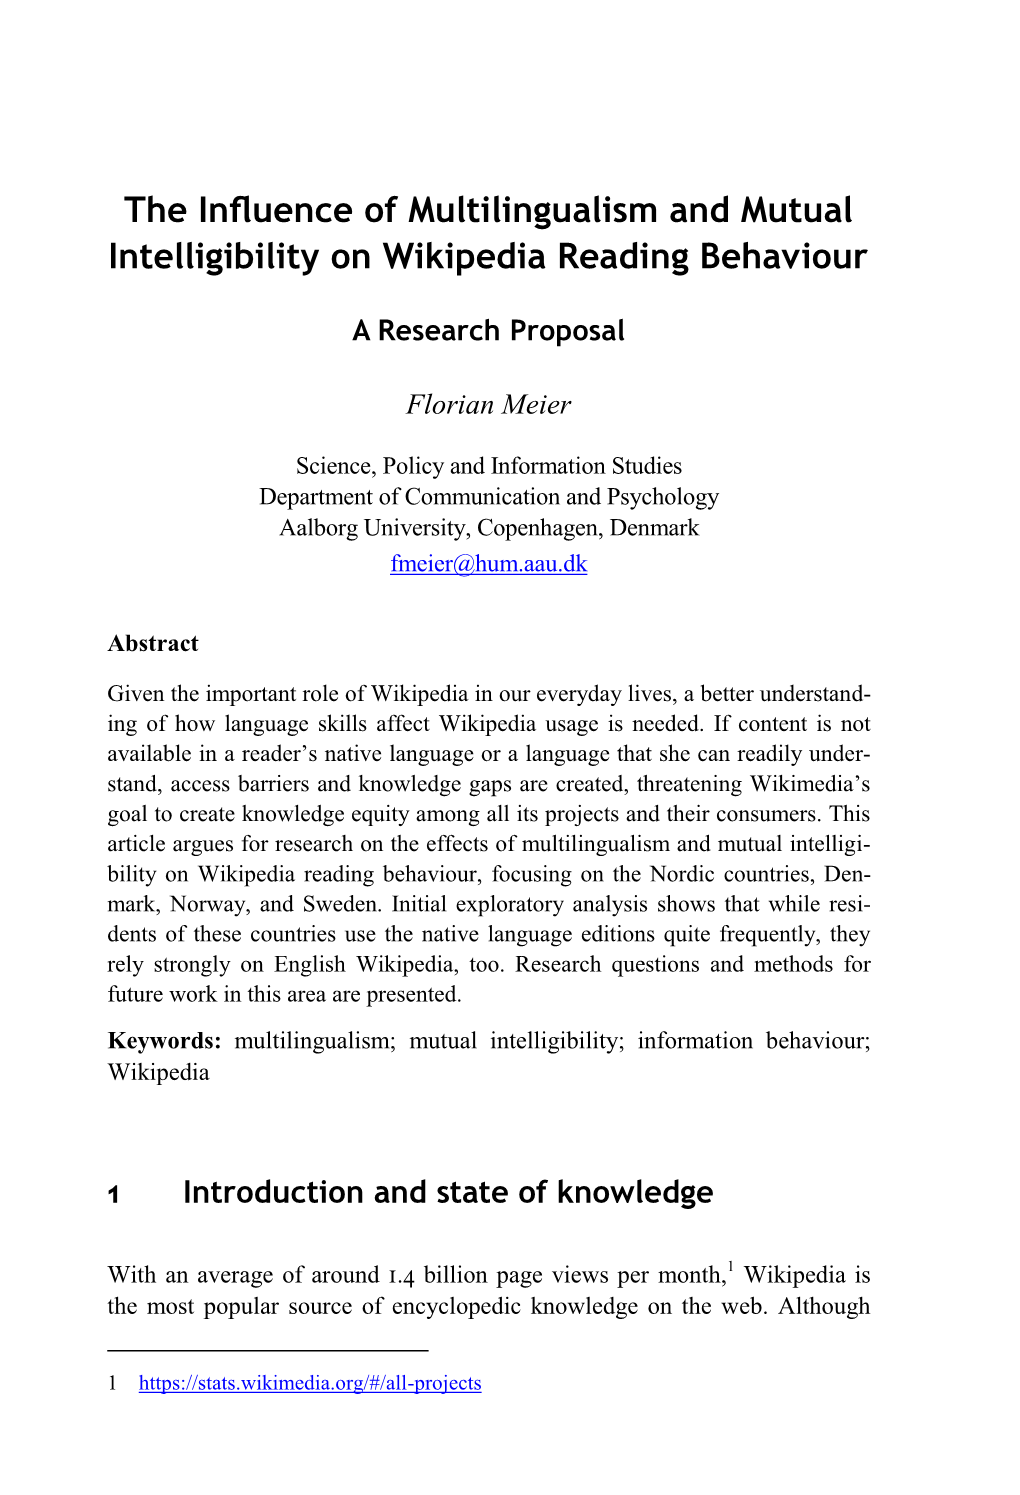 The Influence of Multilingualism and Mutual Intelligibility on Wikipedia